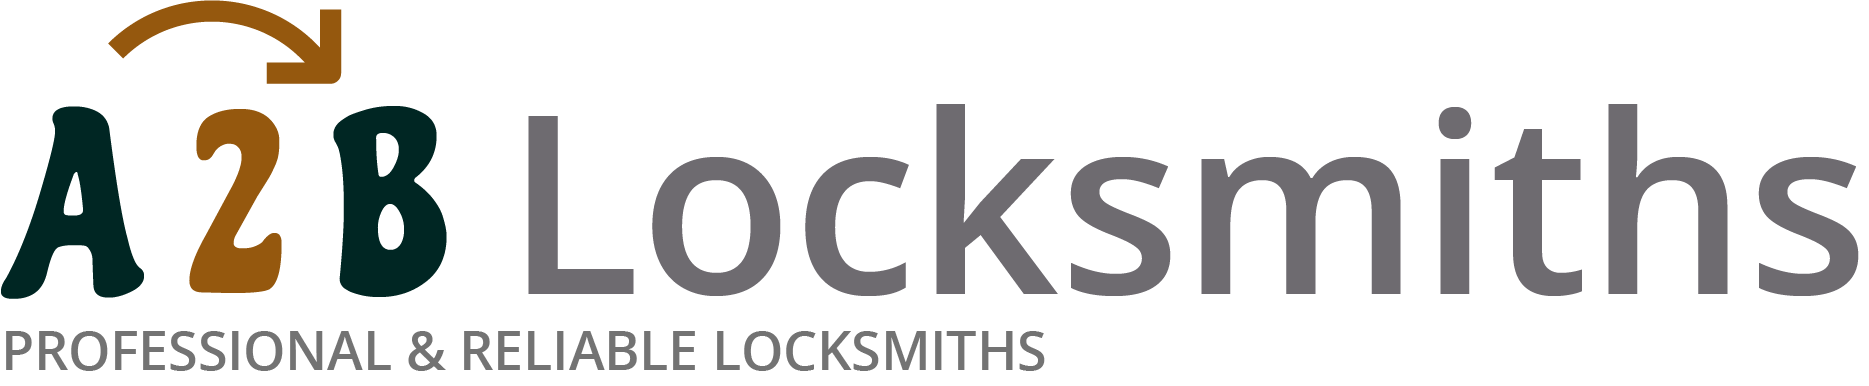 If you are locked out of house in Whitechapel, our 24/7 local emergency locksmith services can help you.